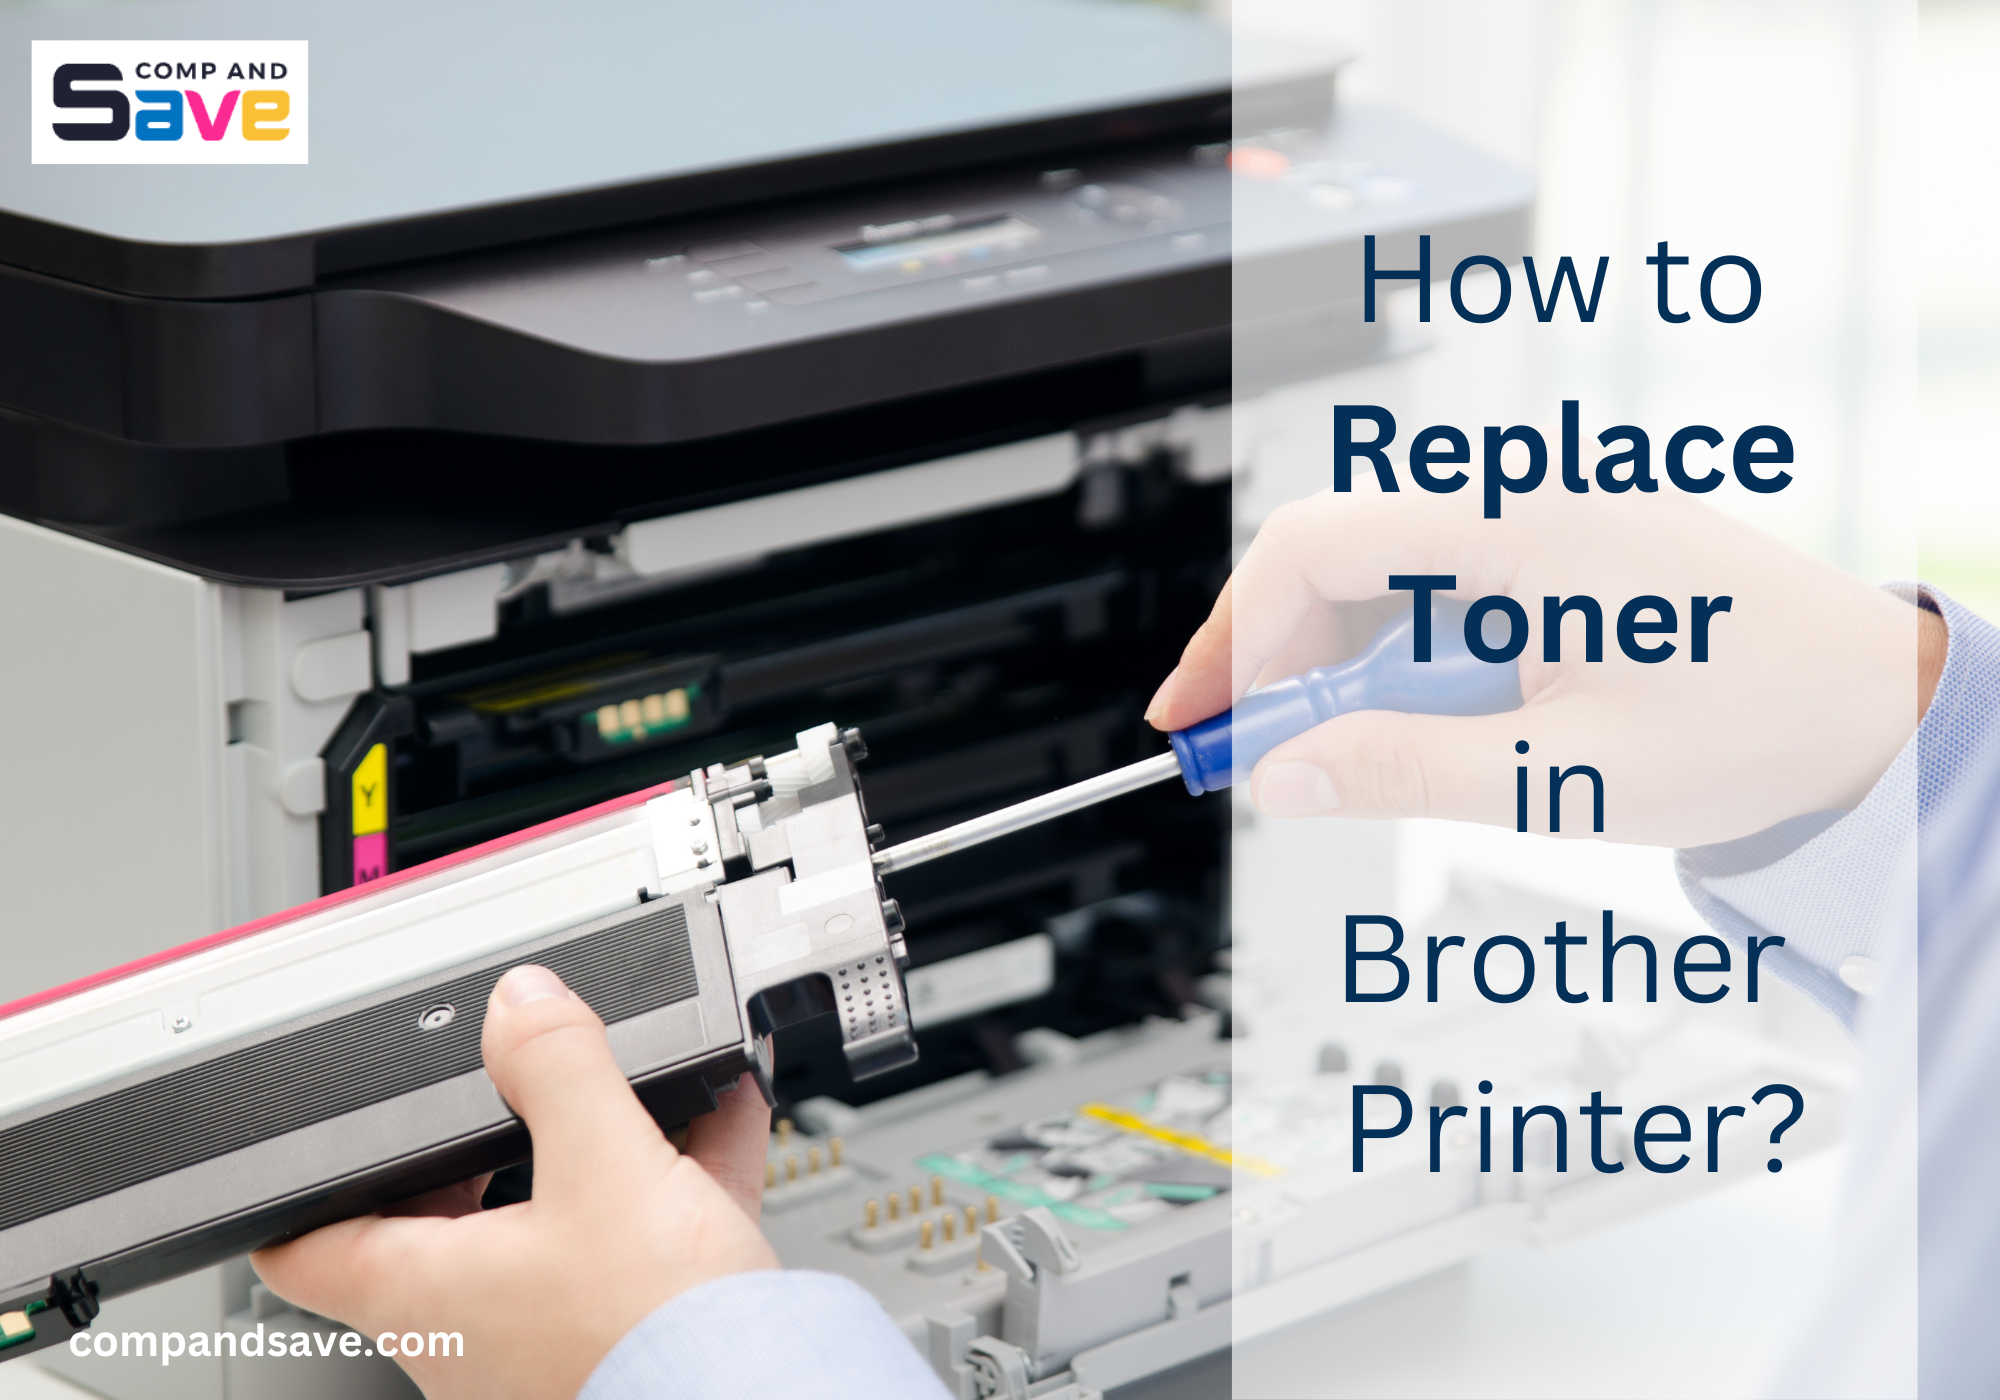 image from How to Replace Toner in Brother Printer?